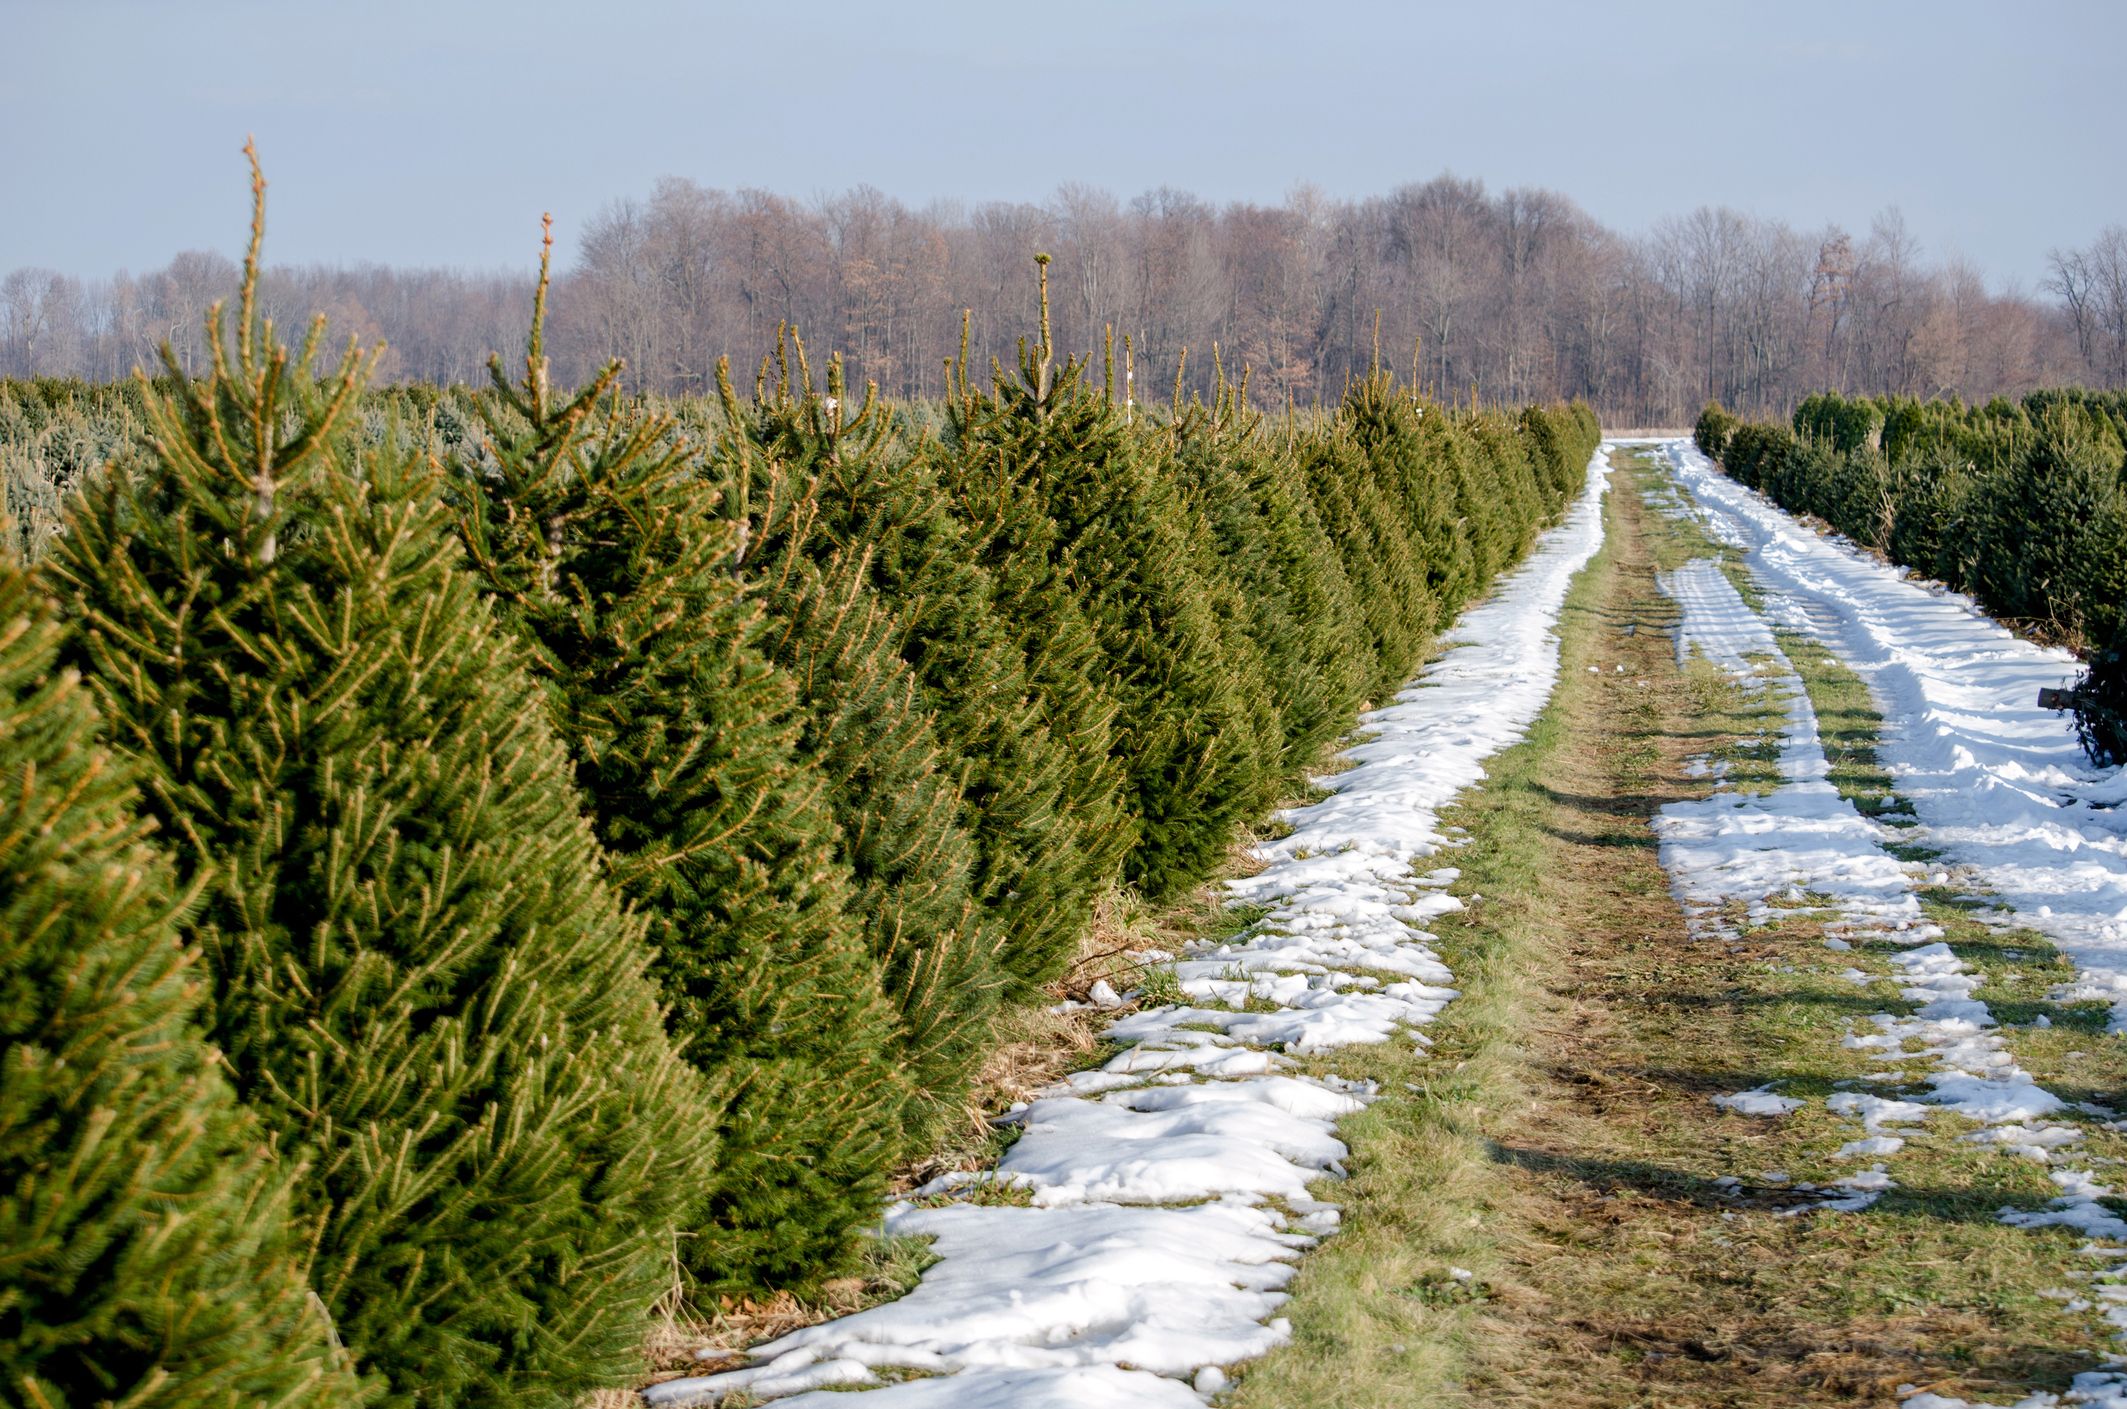 50 Best Christmas Tree Farms in America - Where to Buy a Christmas Tree Near Me